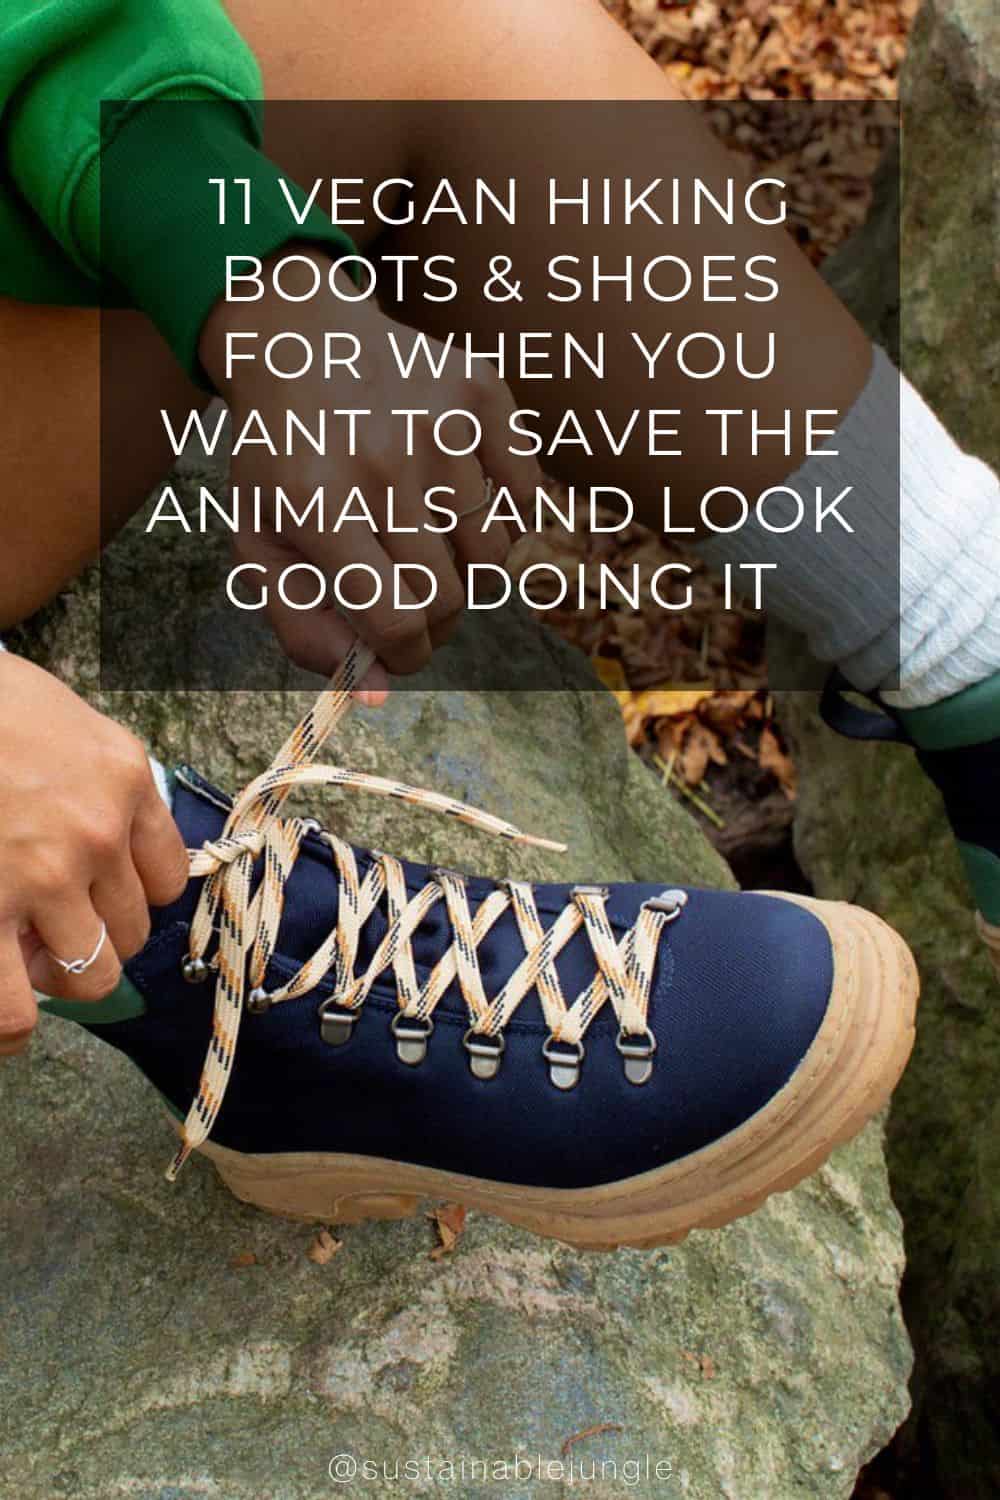 11 Vegan Hiking Boots & Shoes For When You Want to Save The Animals And Look Good Doing It Image by Thesus #veganhikingboots #veganhikingshoes #bestveganhikingboots #veganwaterproofhikingboots #nonleatherhikingboots #veganleatherhikingboots #sustainablejungle